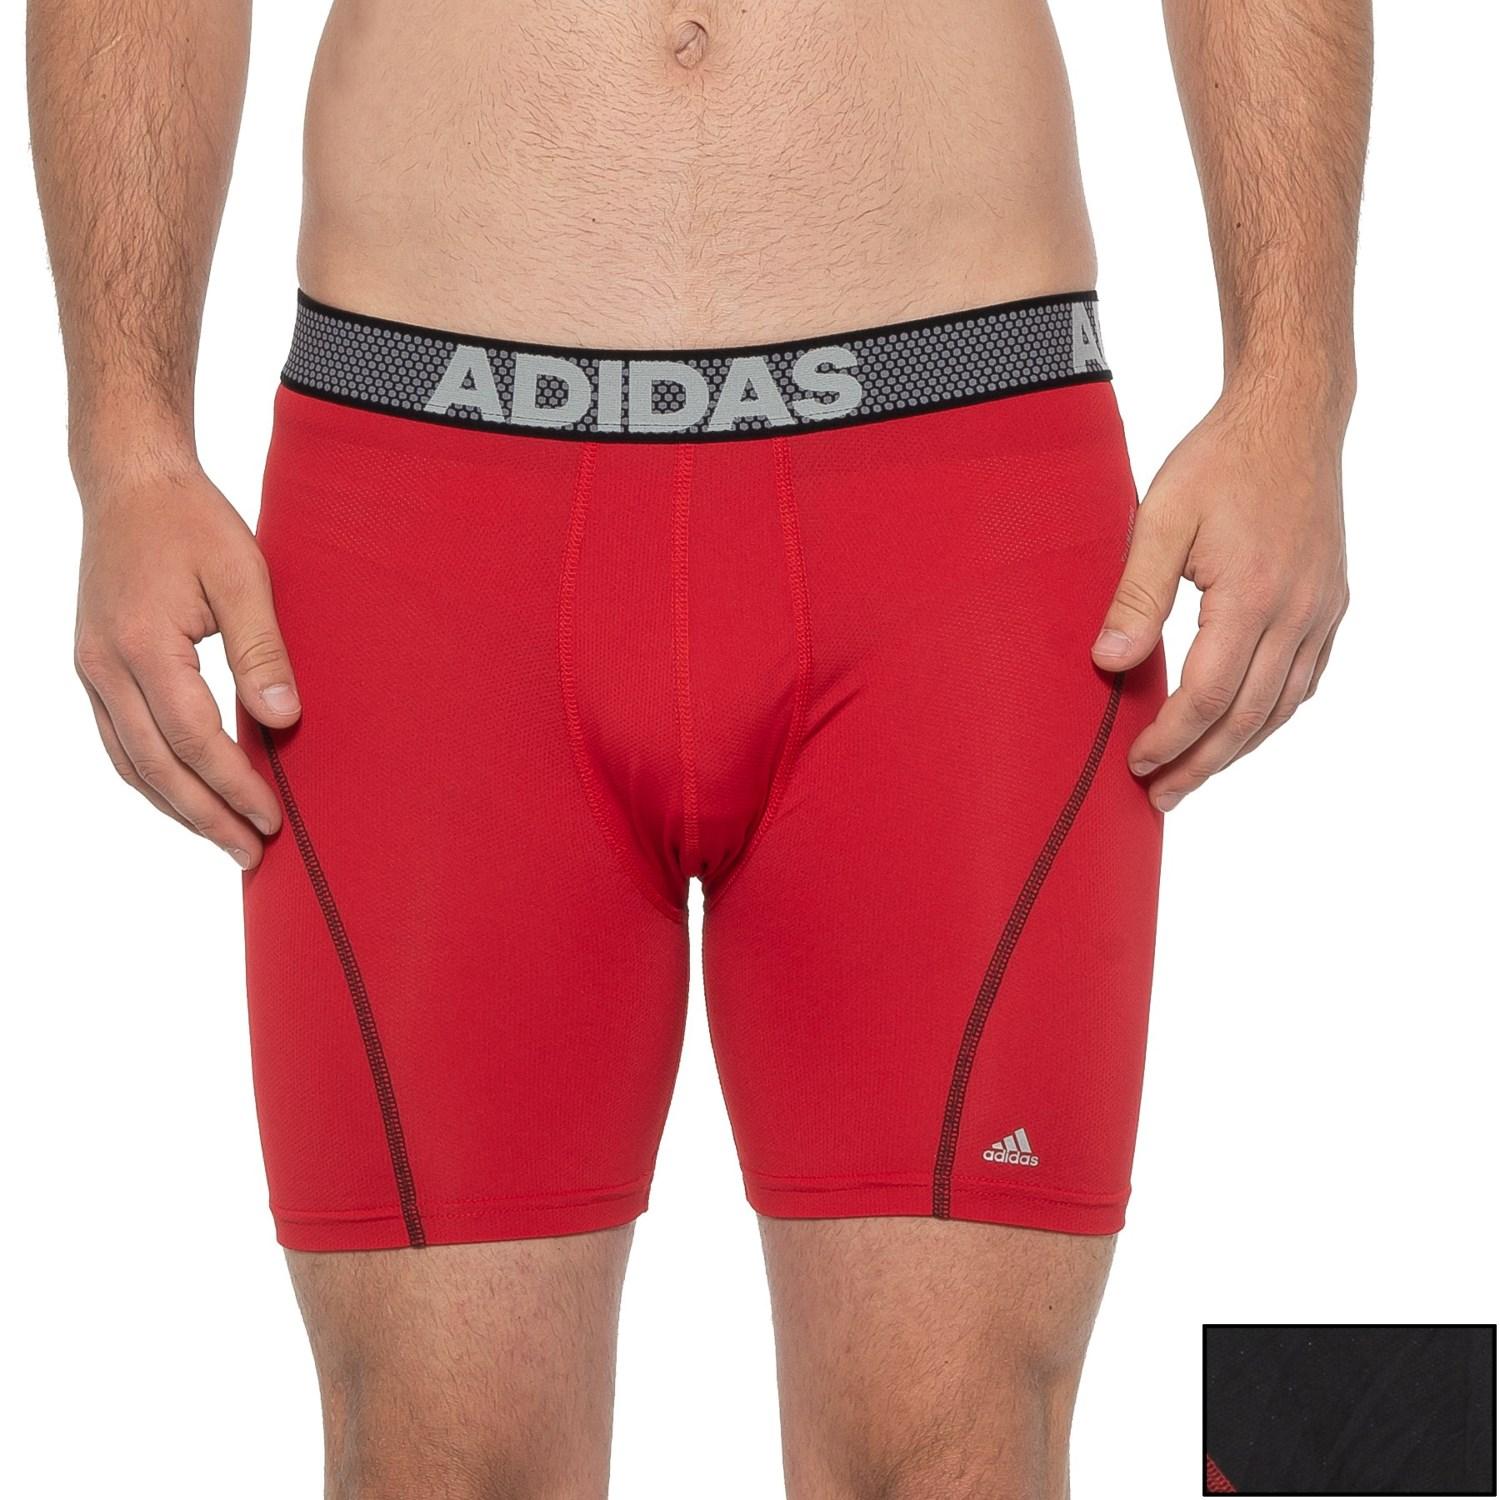 adidas Sport-performance Climacool(r) Boxer Briefs in Black/Real Red Real Red/Black (Red) for 